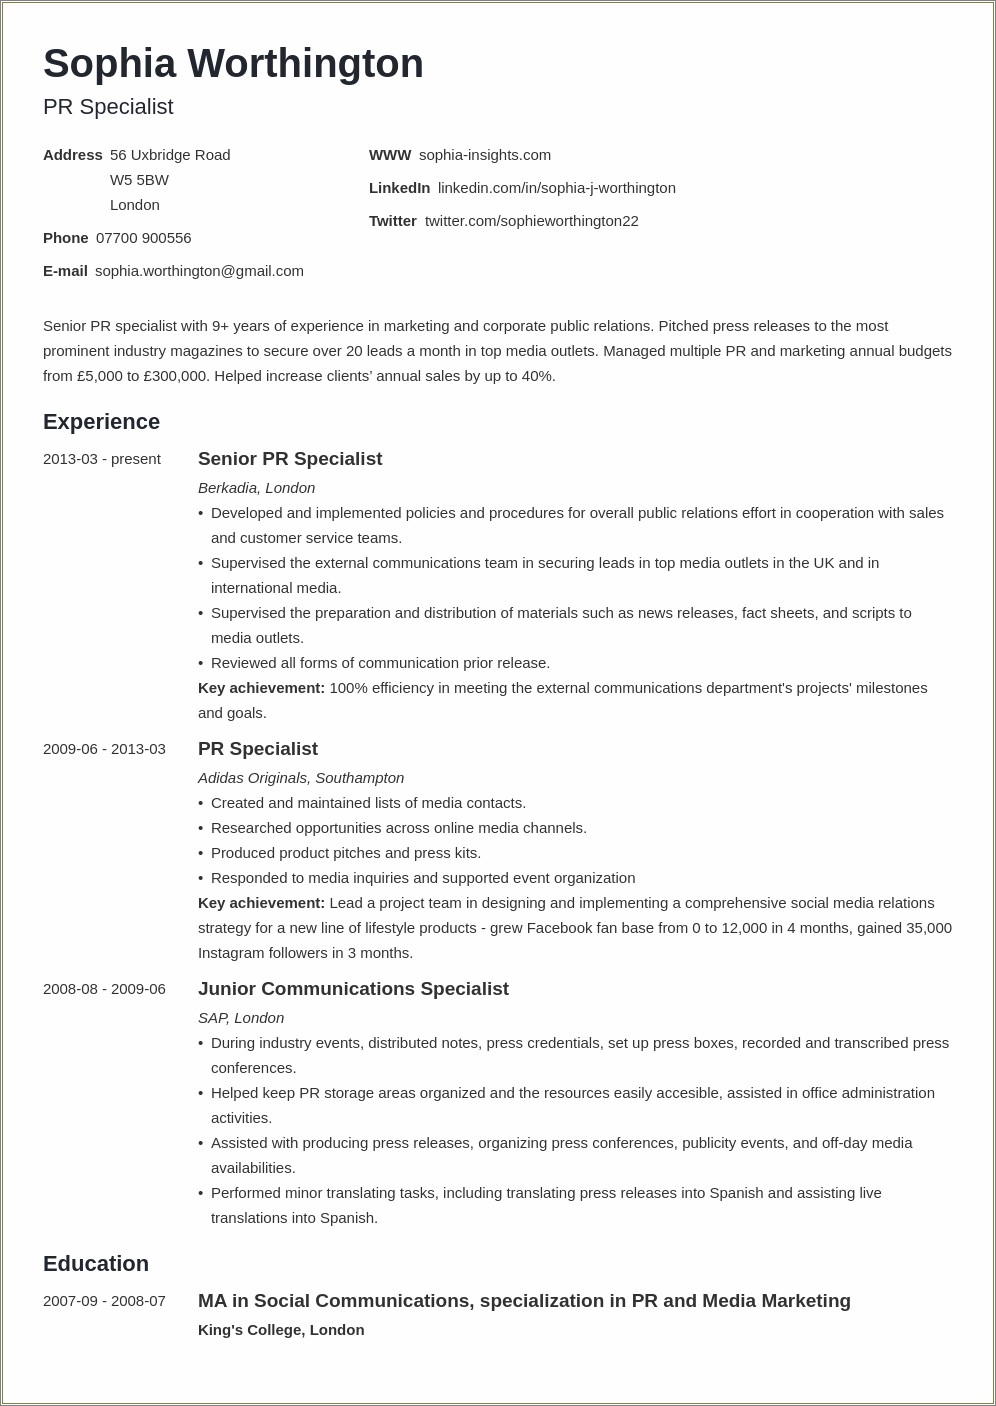 Examples Of Skill And Abilities For A Resume